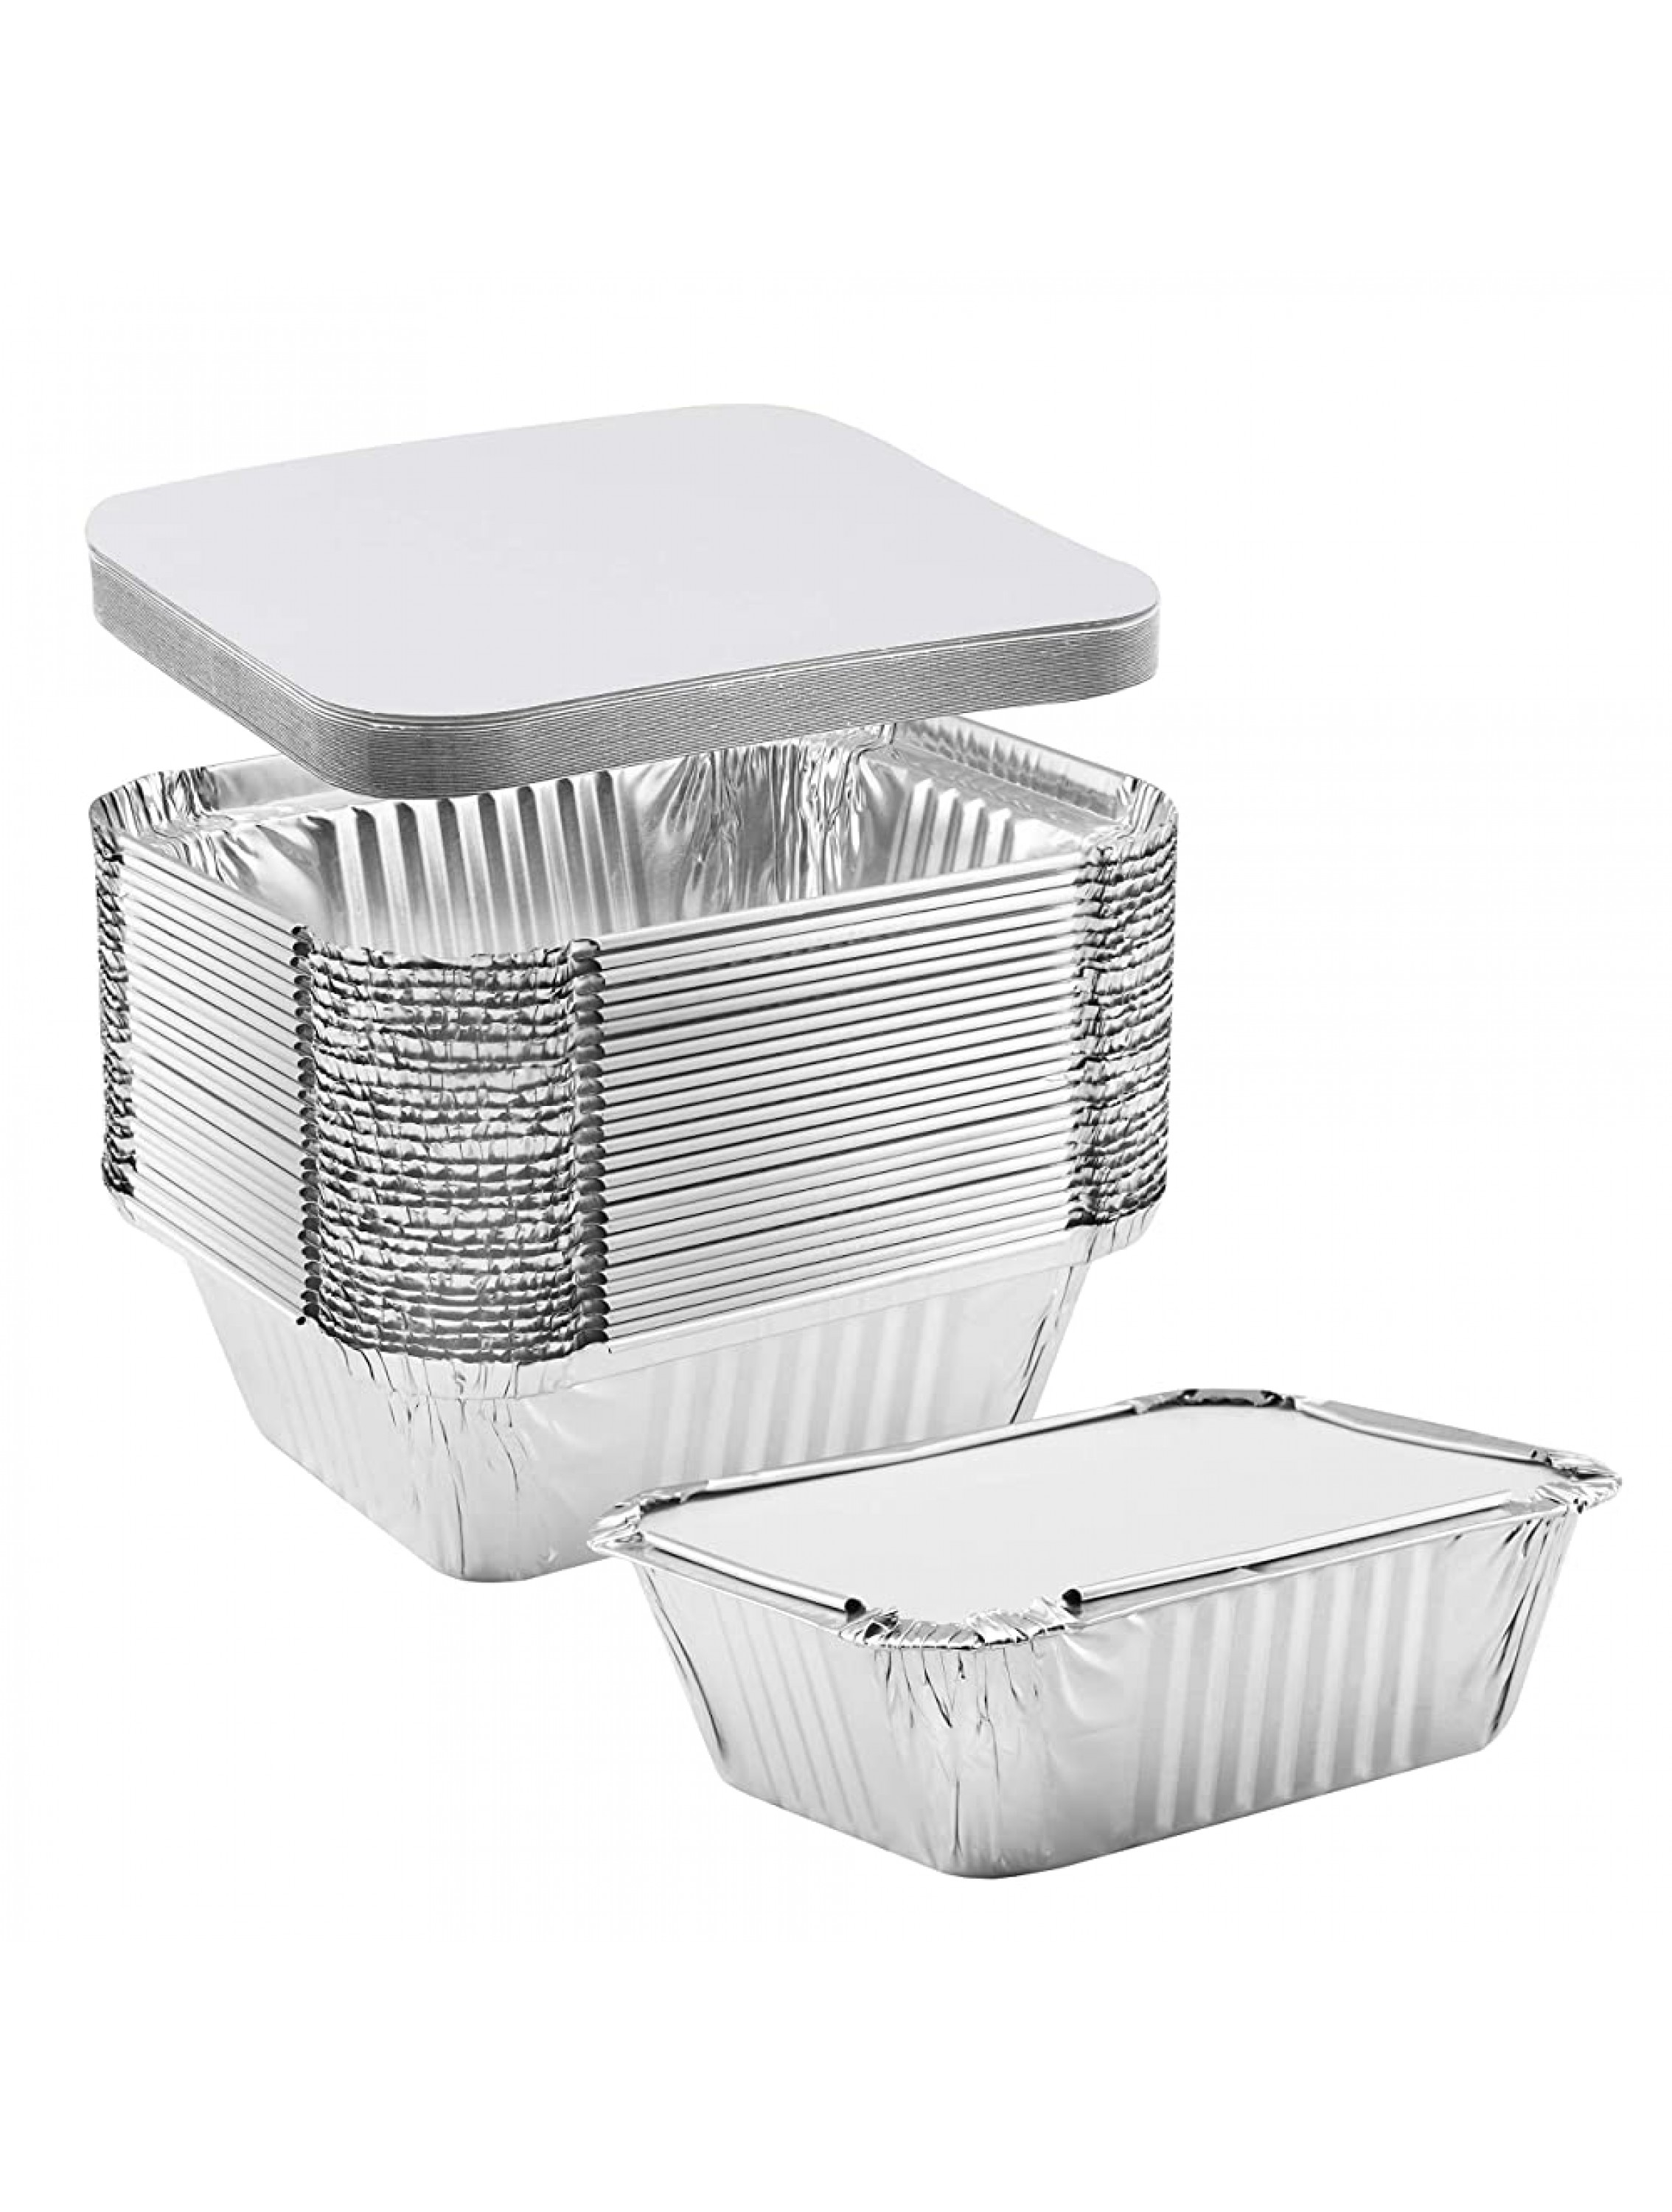 NYHI 50-Pack Extra Small Disposable Aluminum Oblong Foil Pans with Lid Covers Recyclable Tin Food Storage Tray for Cooking Baking Meal Prep Takeout 1 lb-5.75'' x 4.75'' x 1.75 - BNFQMY2LF